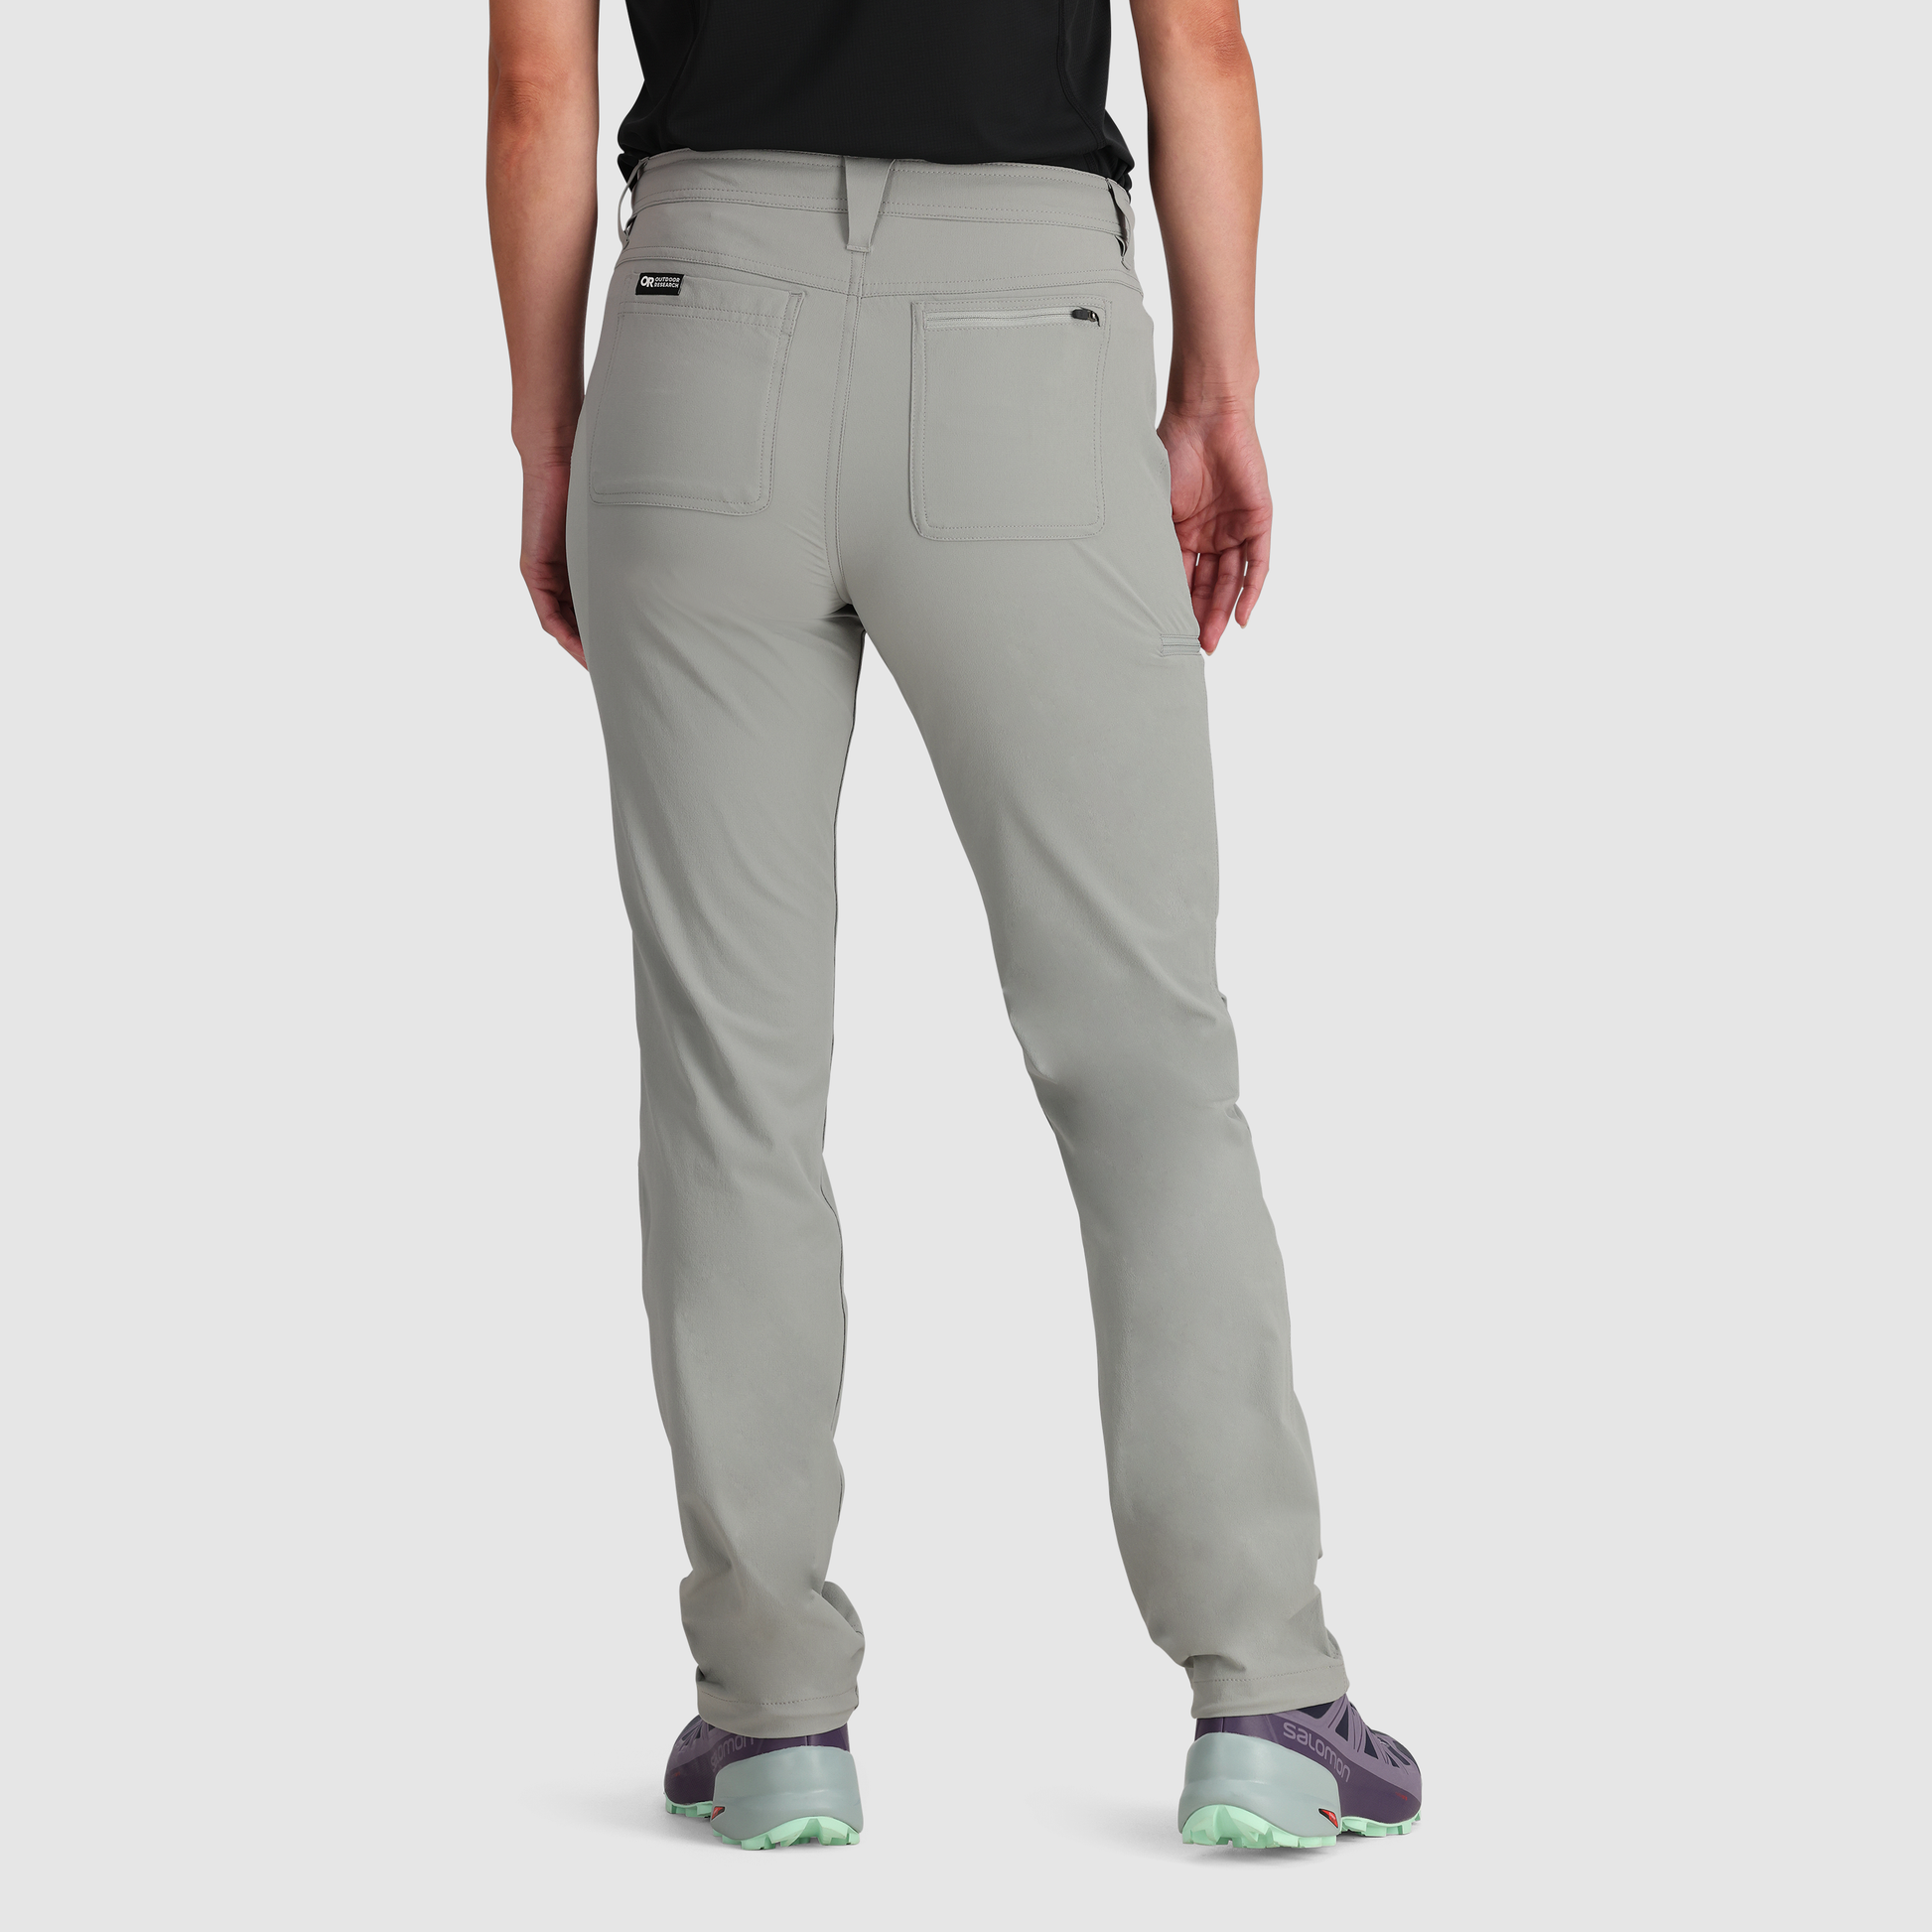 Outdoor Research / Women's Lined Work Pants